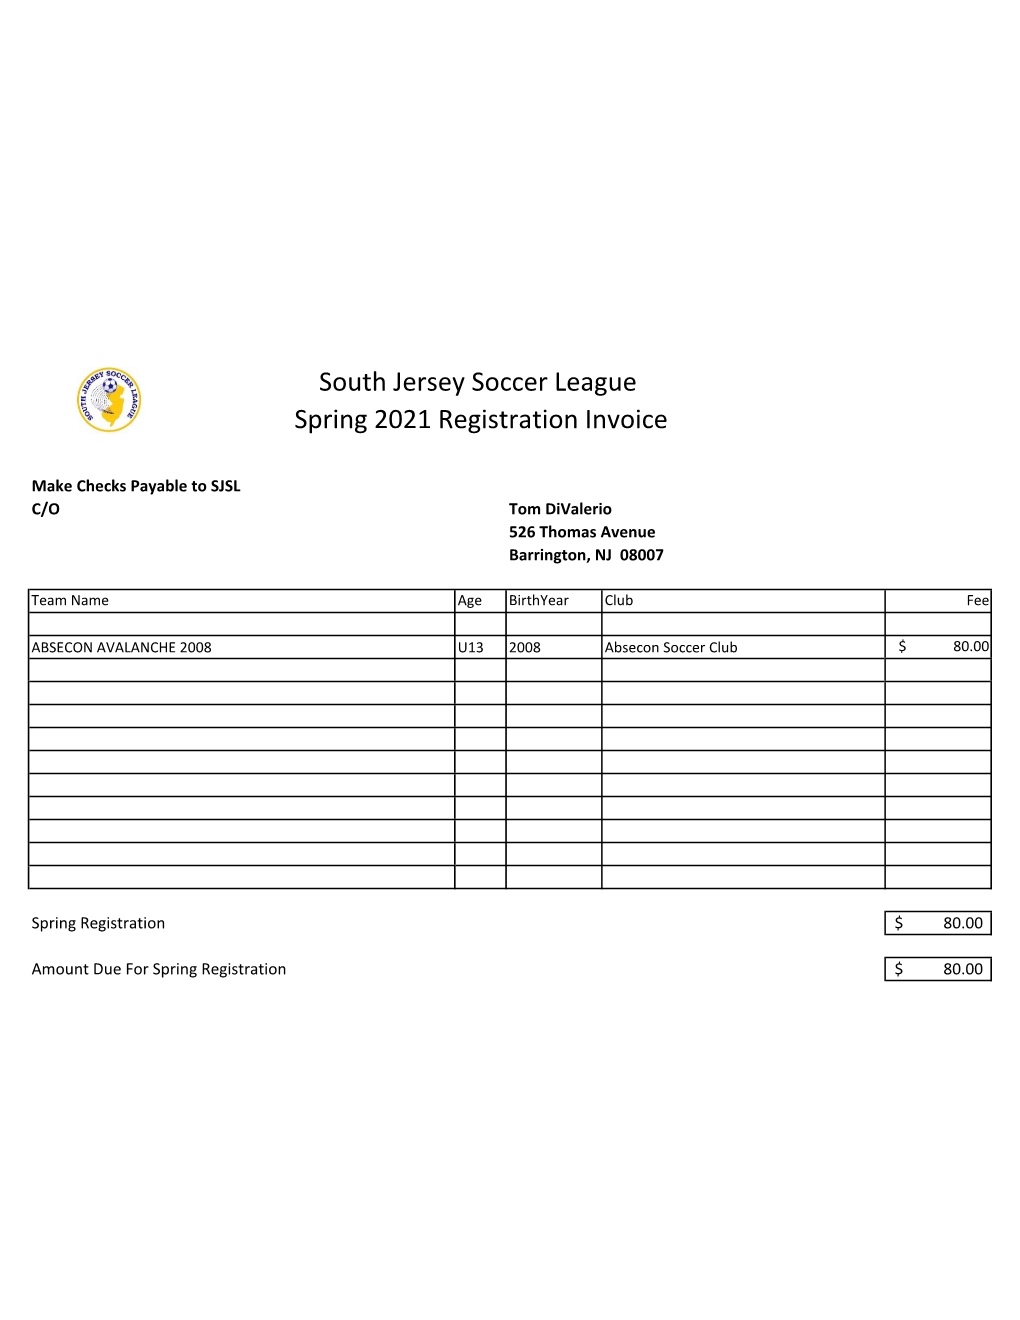 South Jersey Soccer League Spring 2021 Registration Invoice